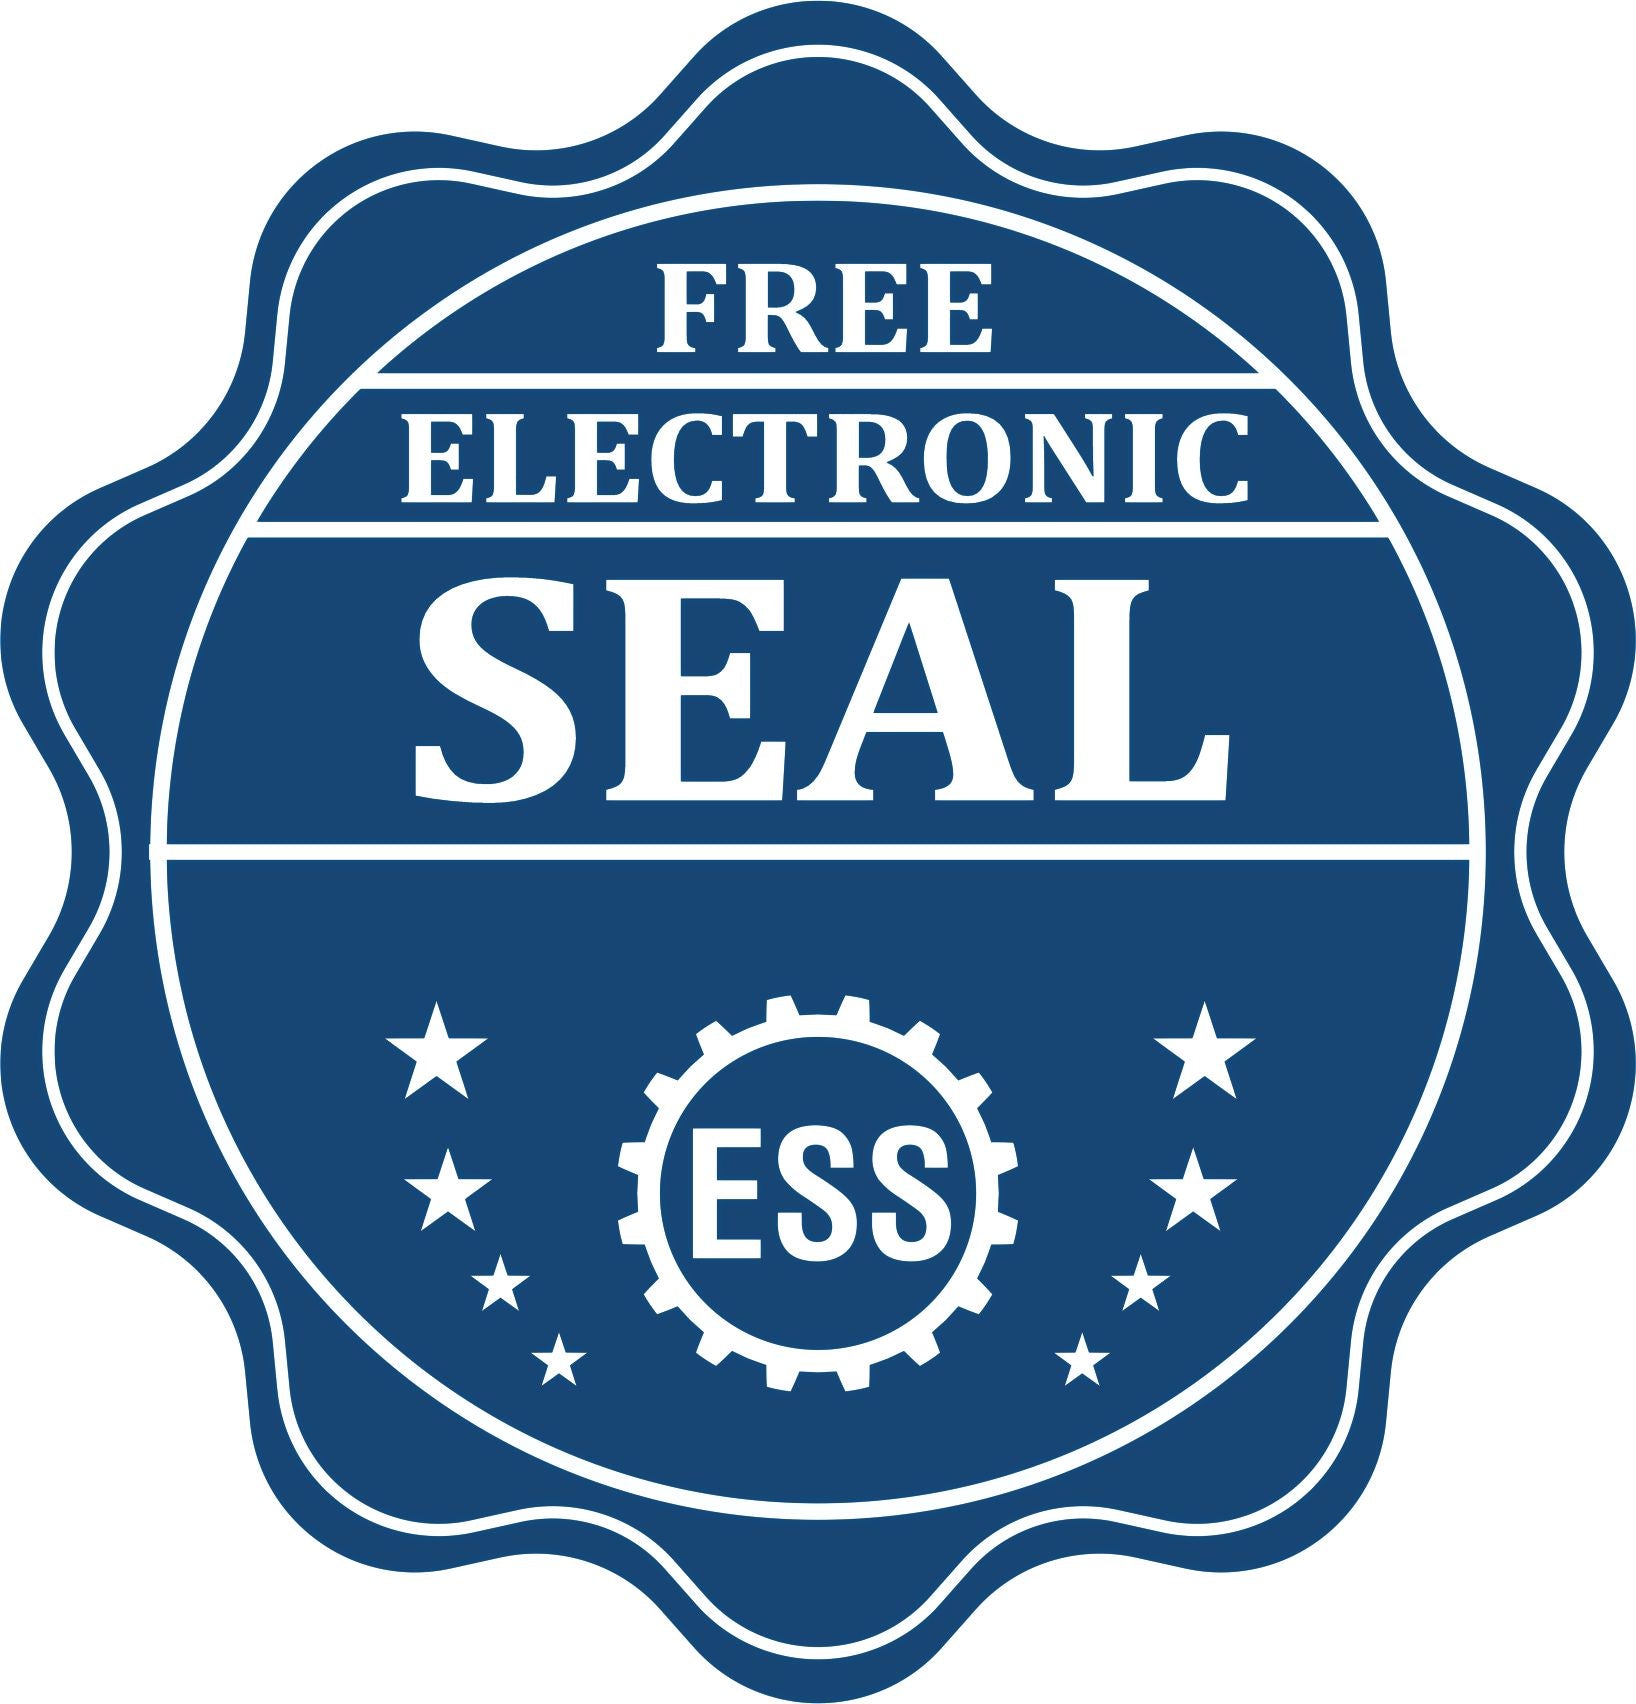 A badge showing a free electronic seal for the Slim Pre-Inked New Mexico Architect Seal Stamp with stars and the ESS gear on the emblem.